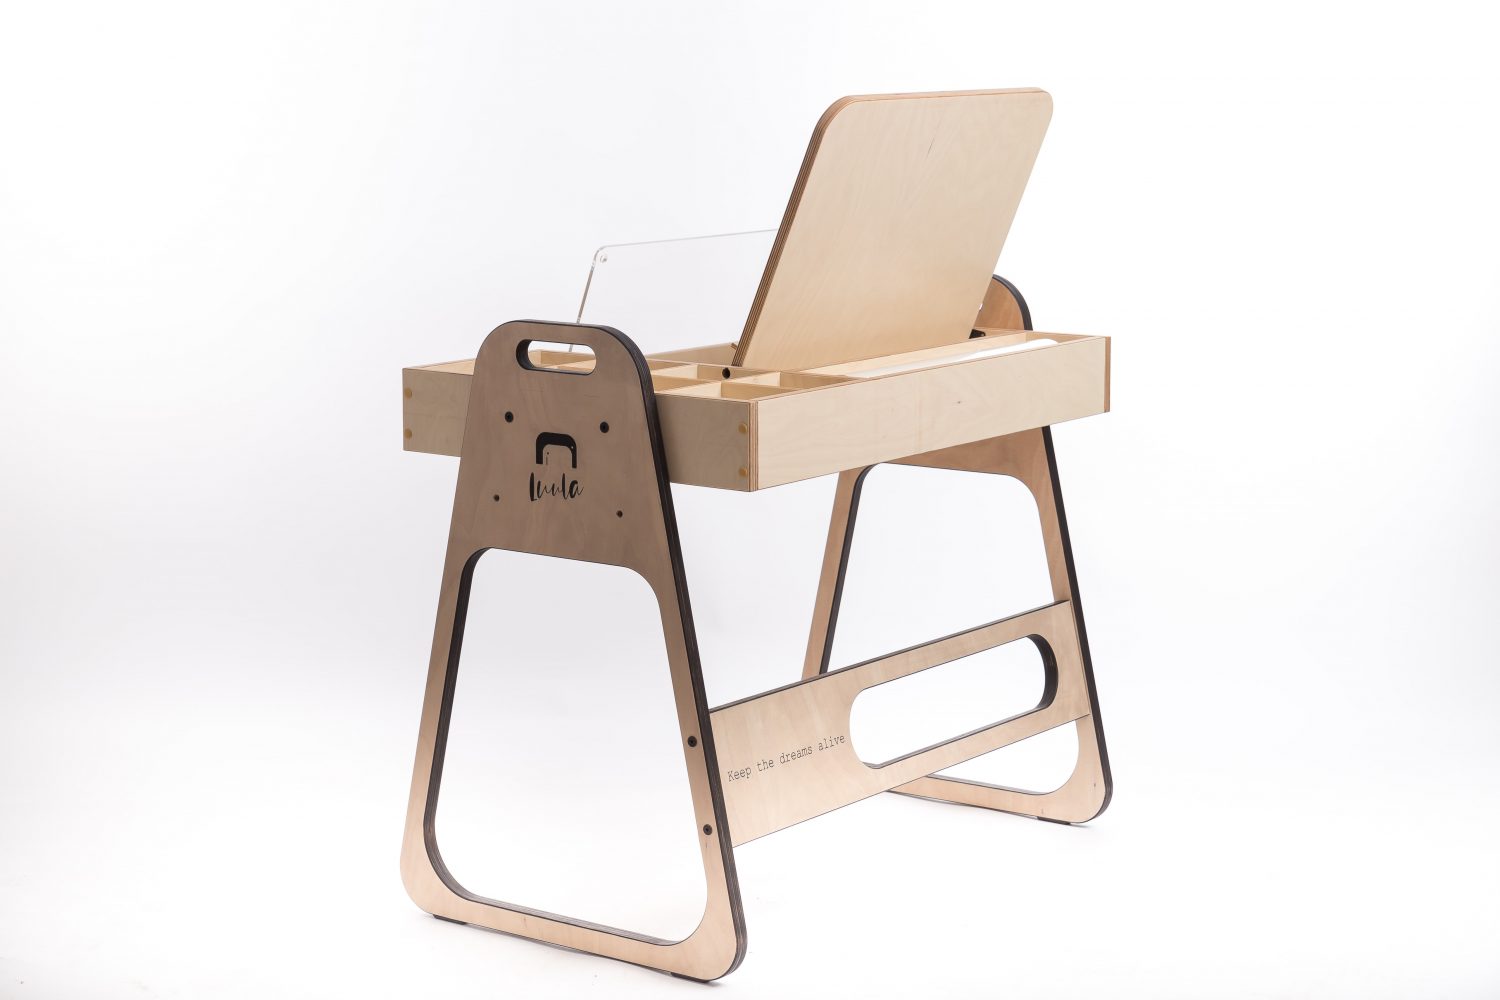 Childrens Montessori Table and Chair by Luula